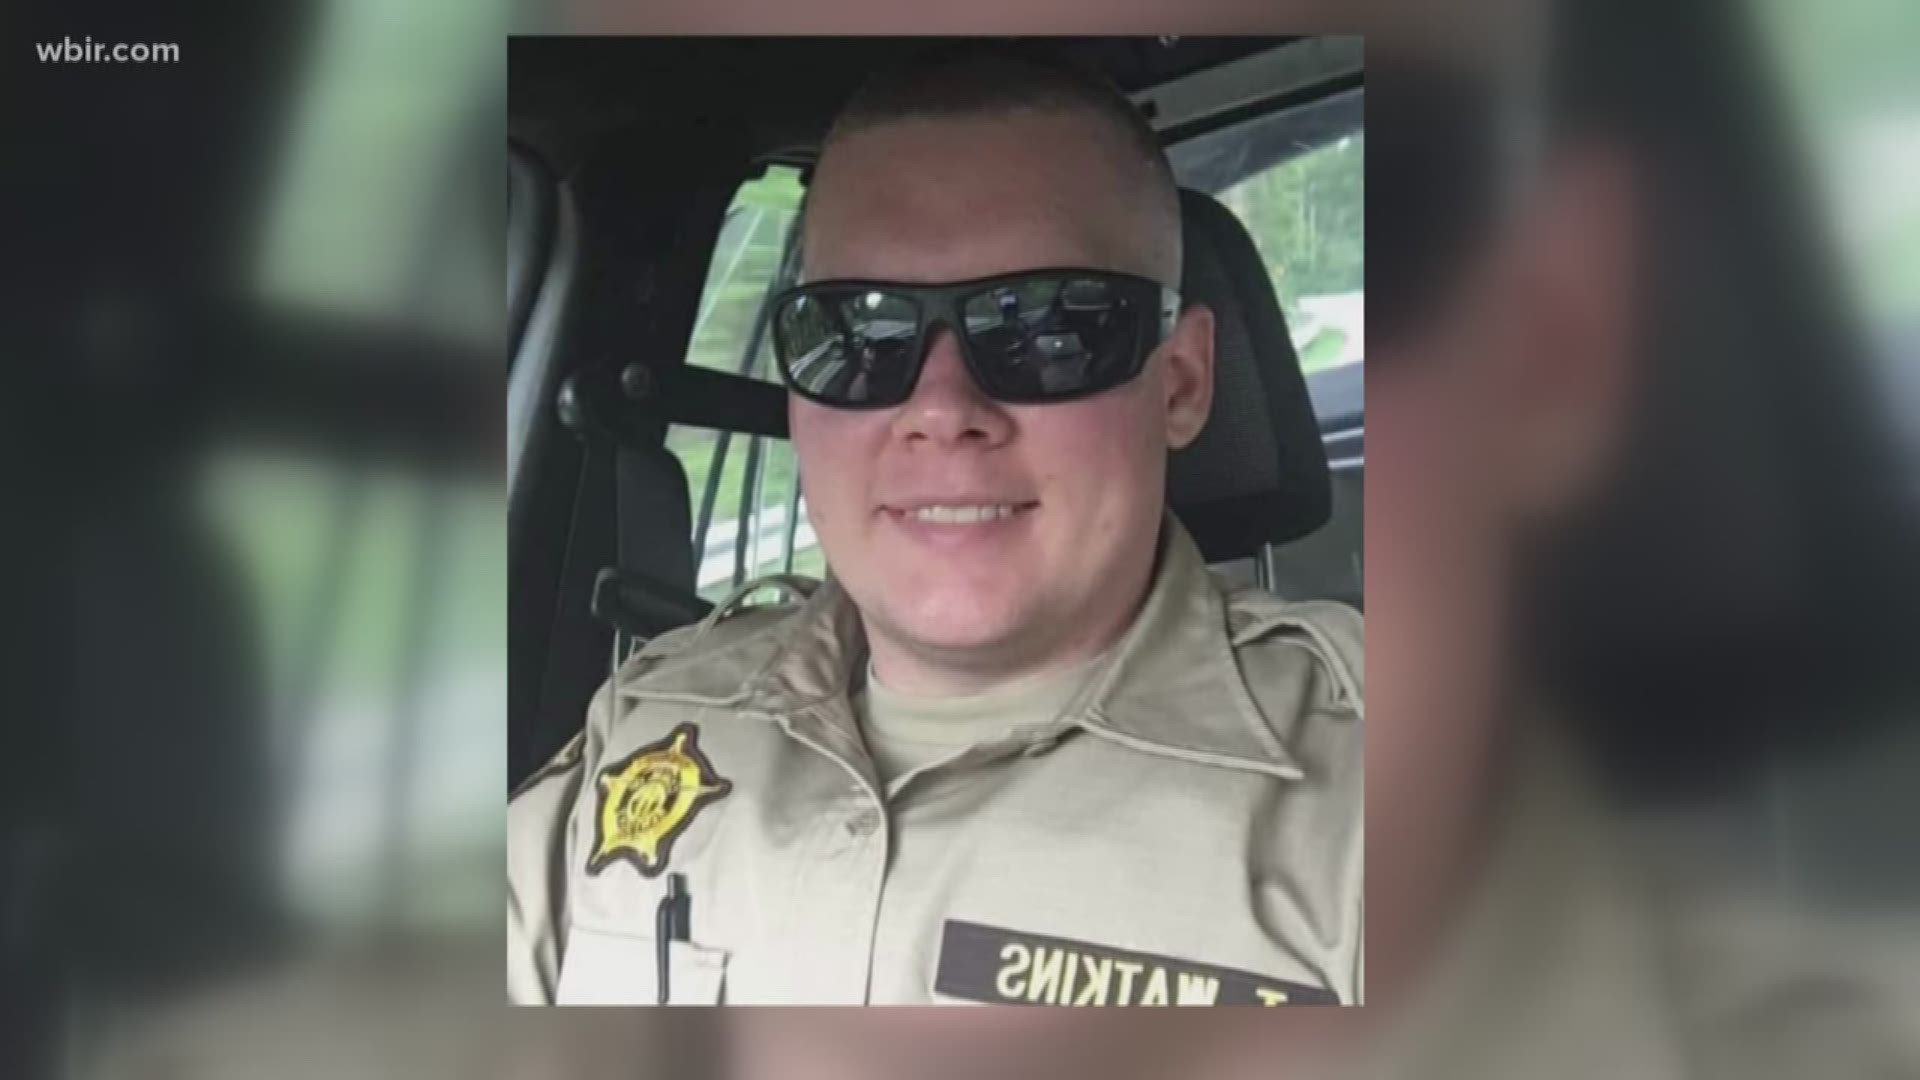 We're hearing from the family of a Kentucky deputy shot in the line of duty.